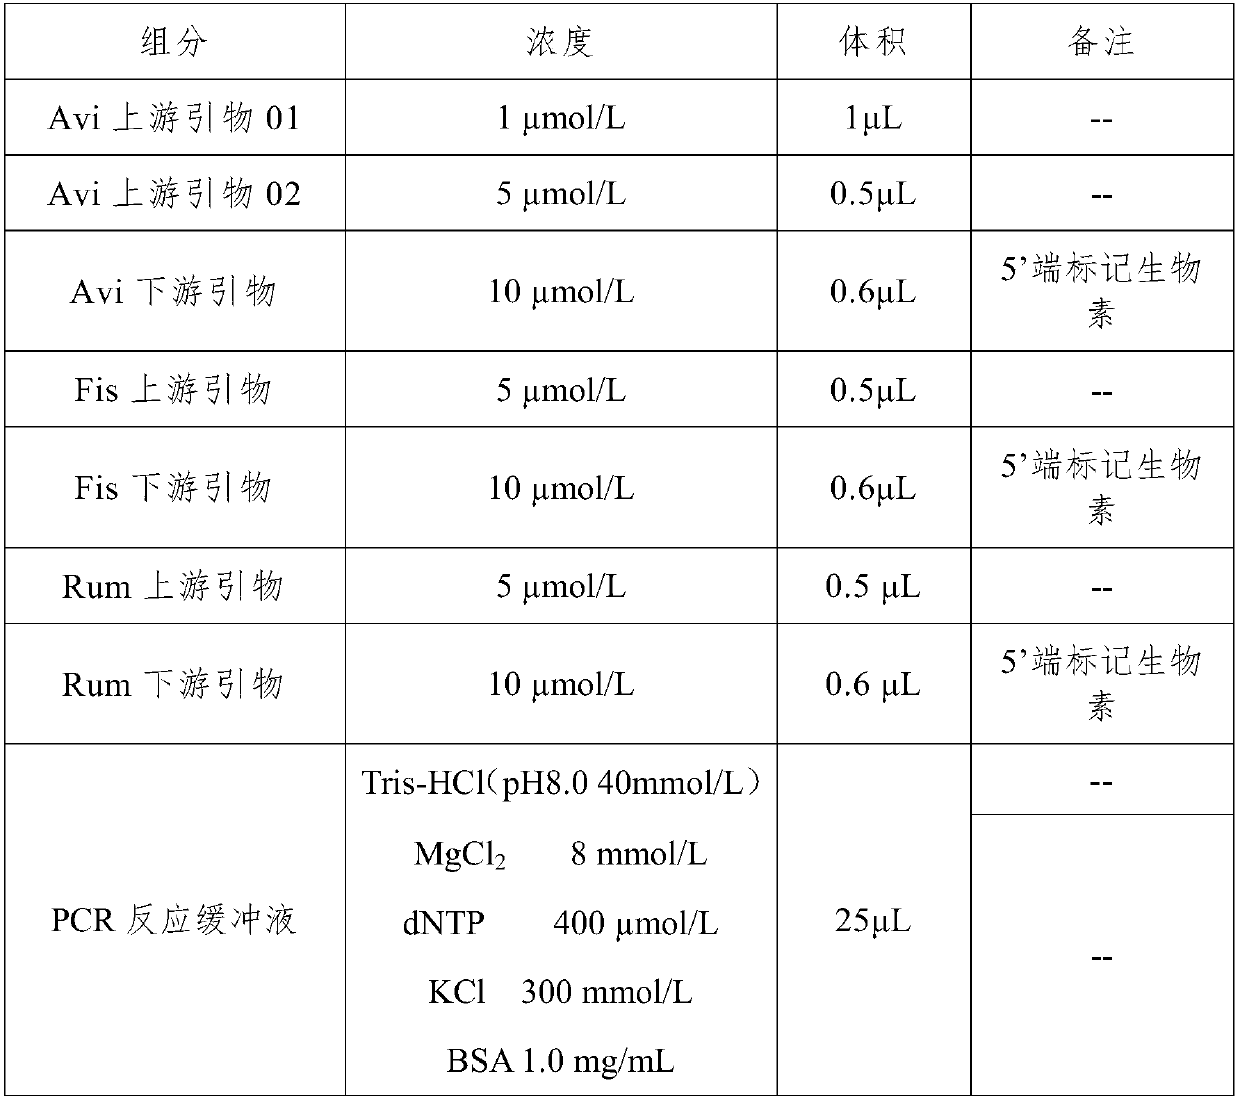 Nucleic acid, method and kit for multi-liquid phase gene chip for simultaneously detecting and identifying components of three major categories of poultry, fish and ruminants